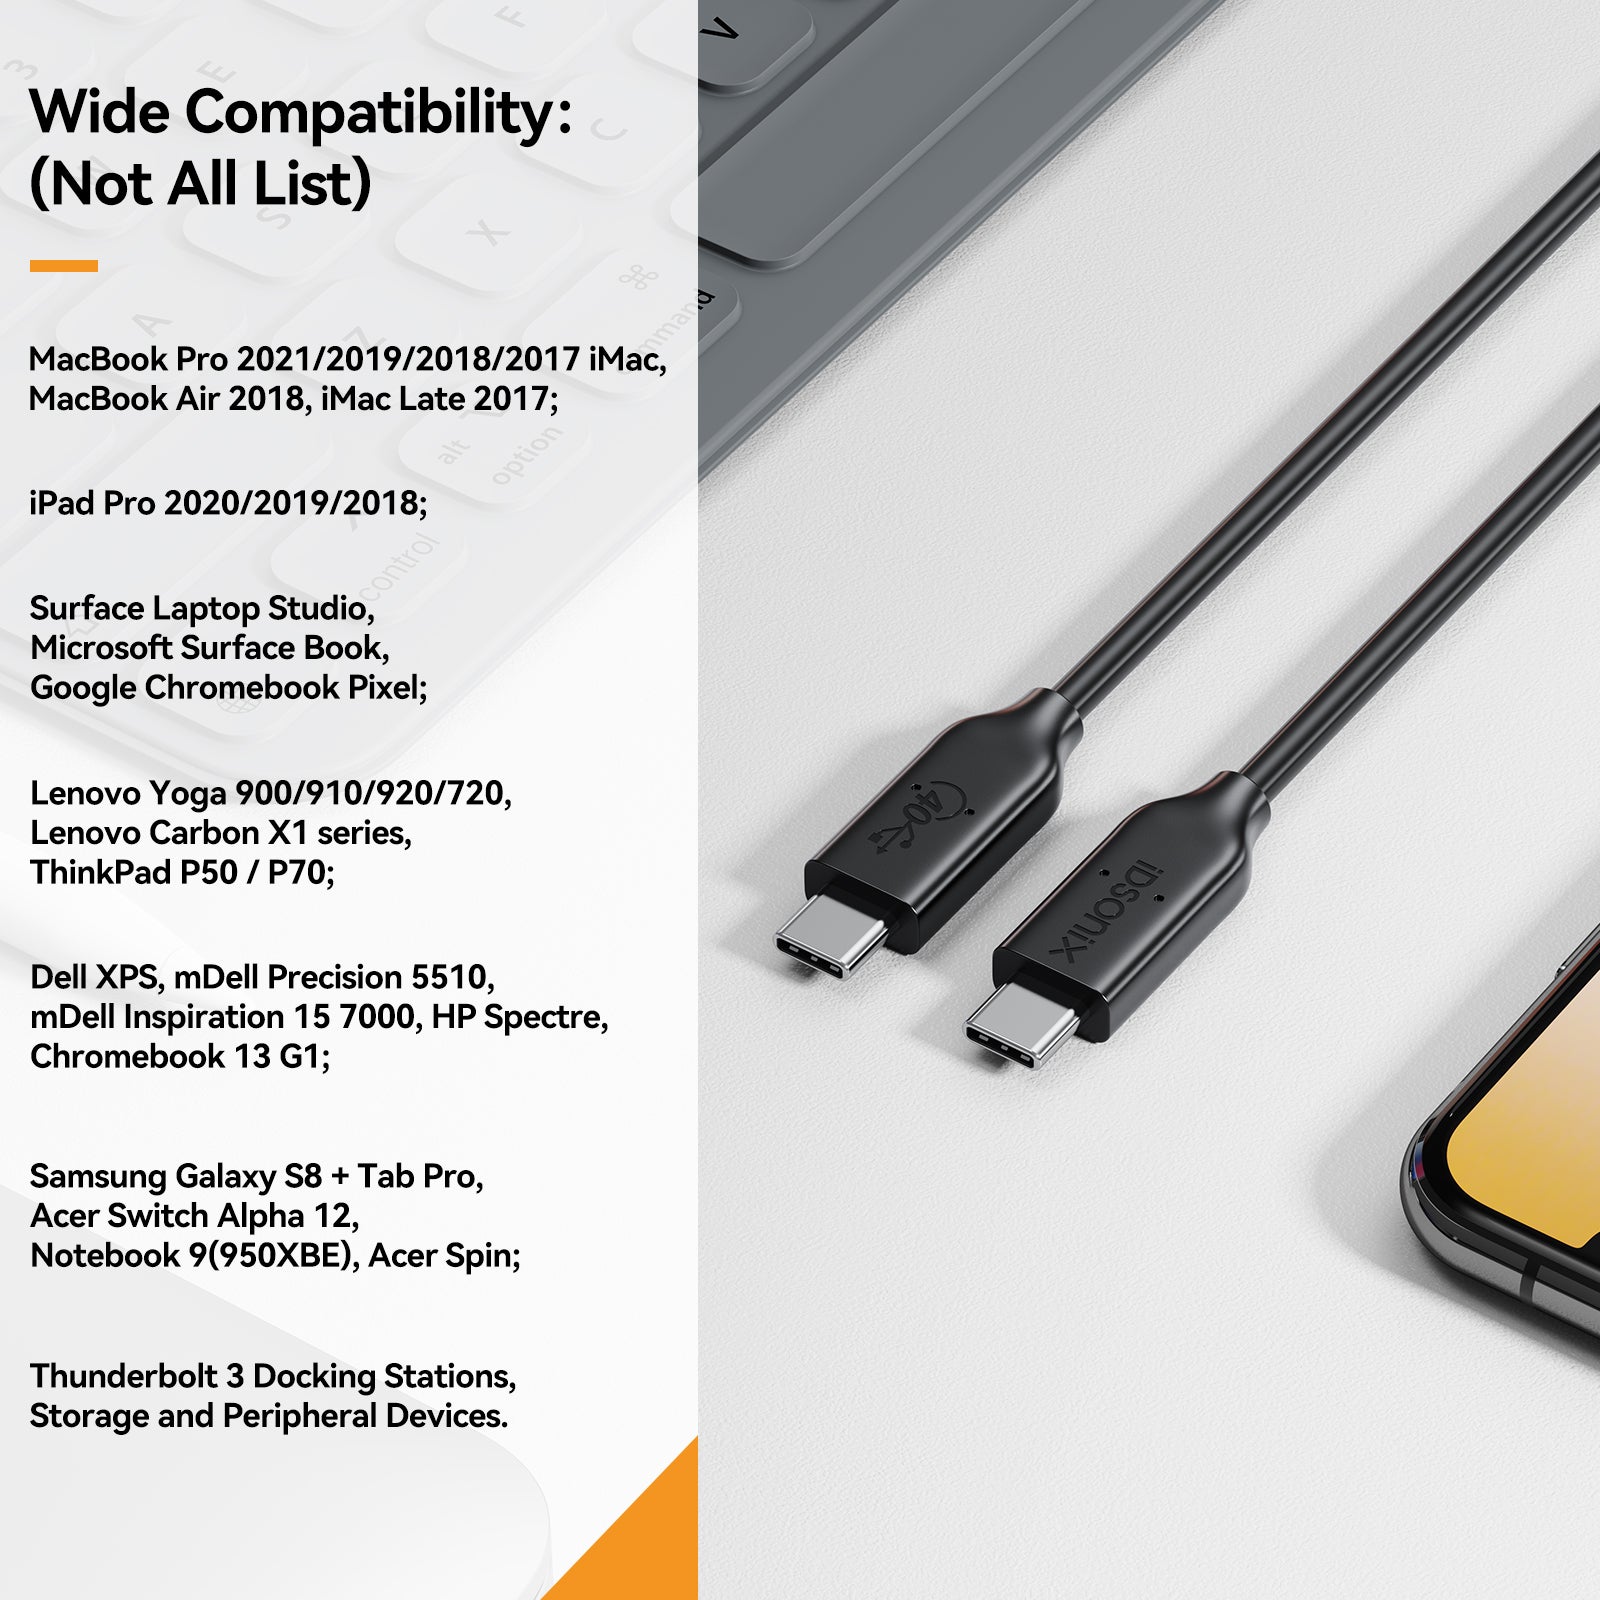 USB4 Cable 40Gbps, iDsonix Thunderbolt 4/Thunderbolt 3 Cable, USB 4.0 Cable Support HD Video 8K@60Hz/Dual 4K@60Hz, 100W Charging Compatible with External SSD, eGpu,USB-C Docking Station,MacBook etc